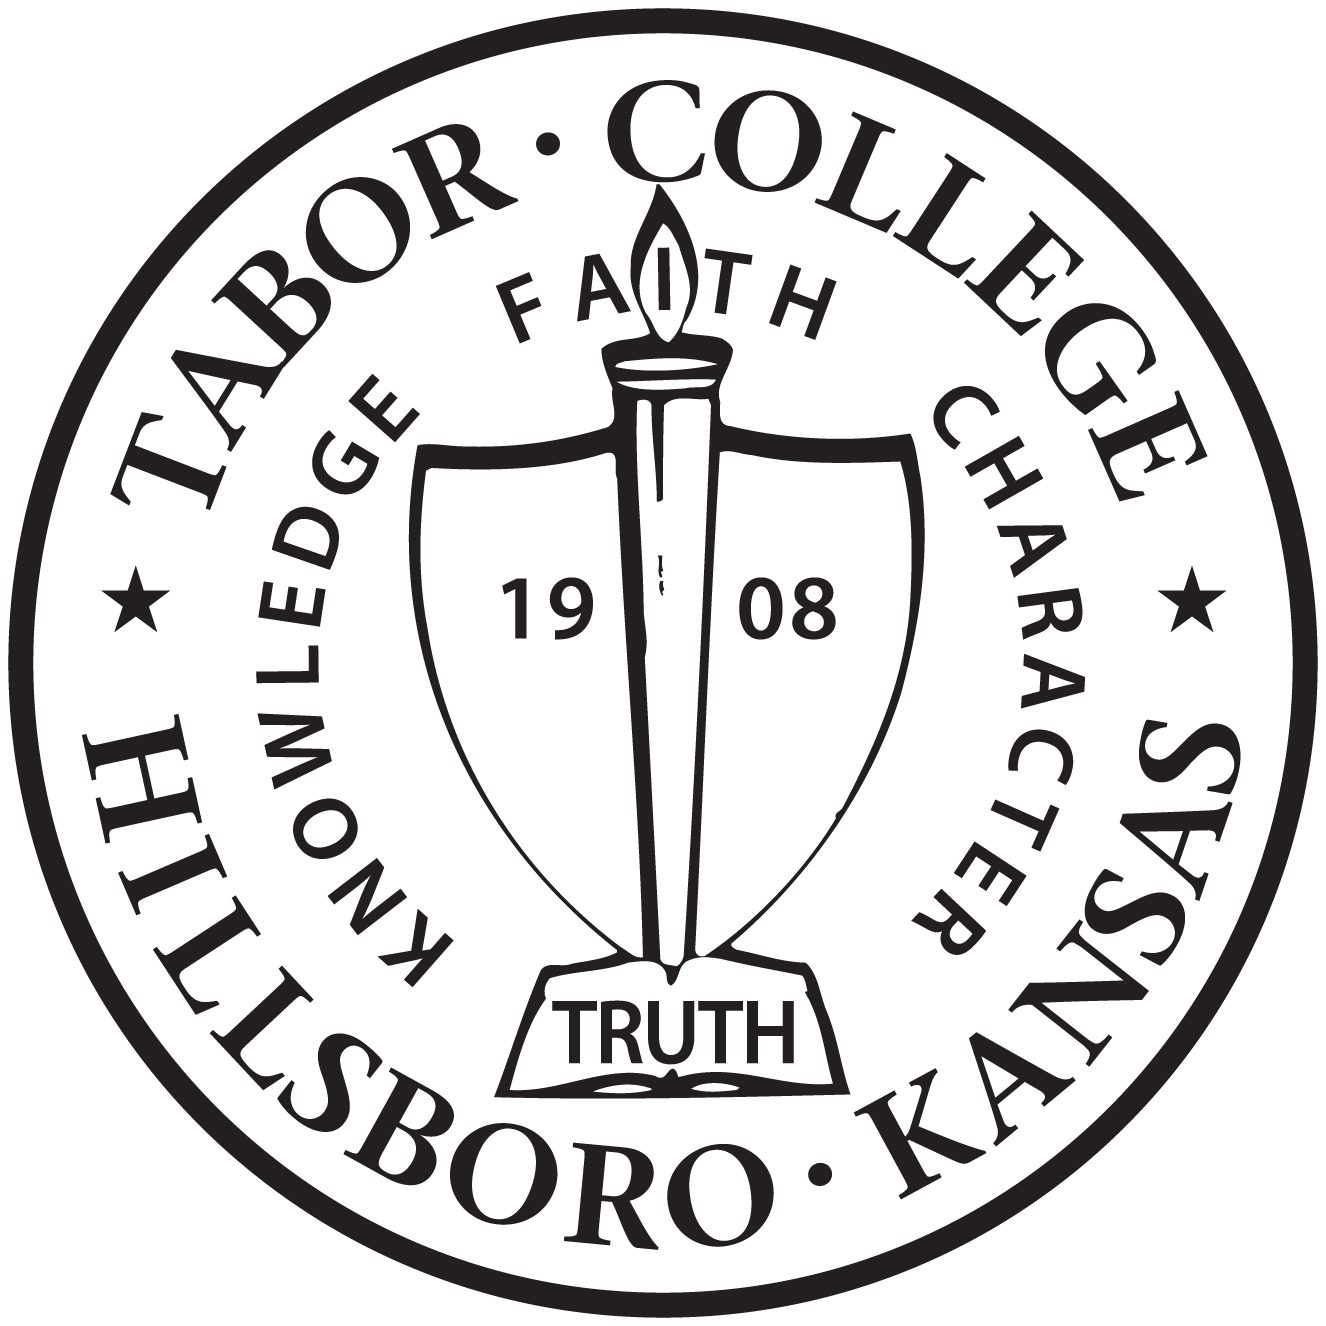 New Mba In Sports Management And Leadership Starting This Fall Tabor College